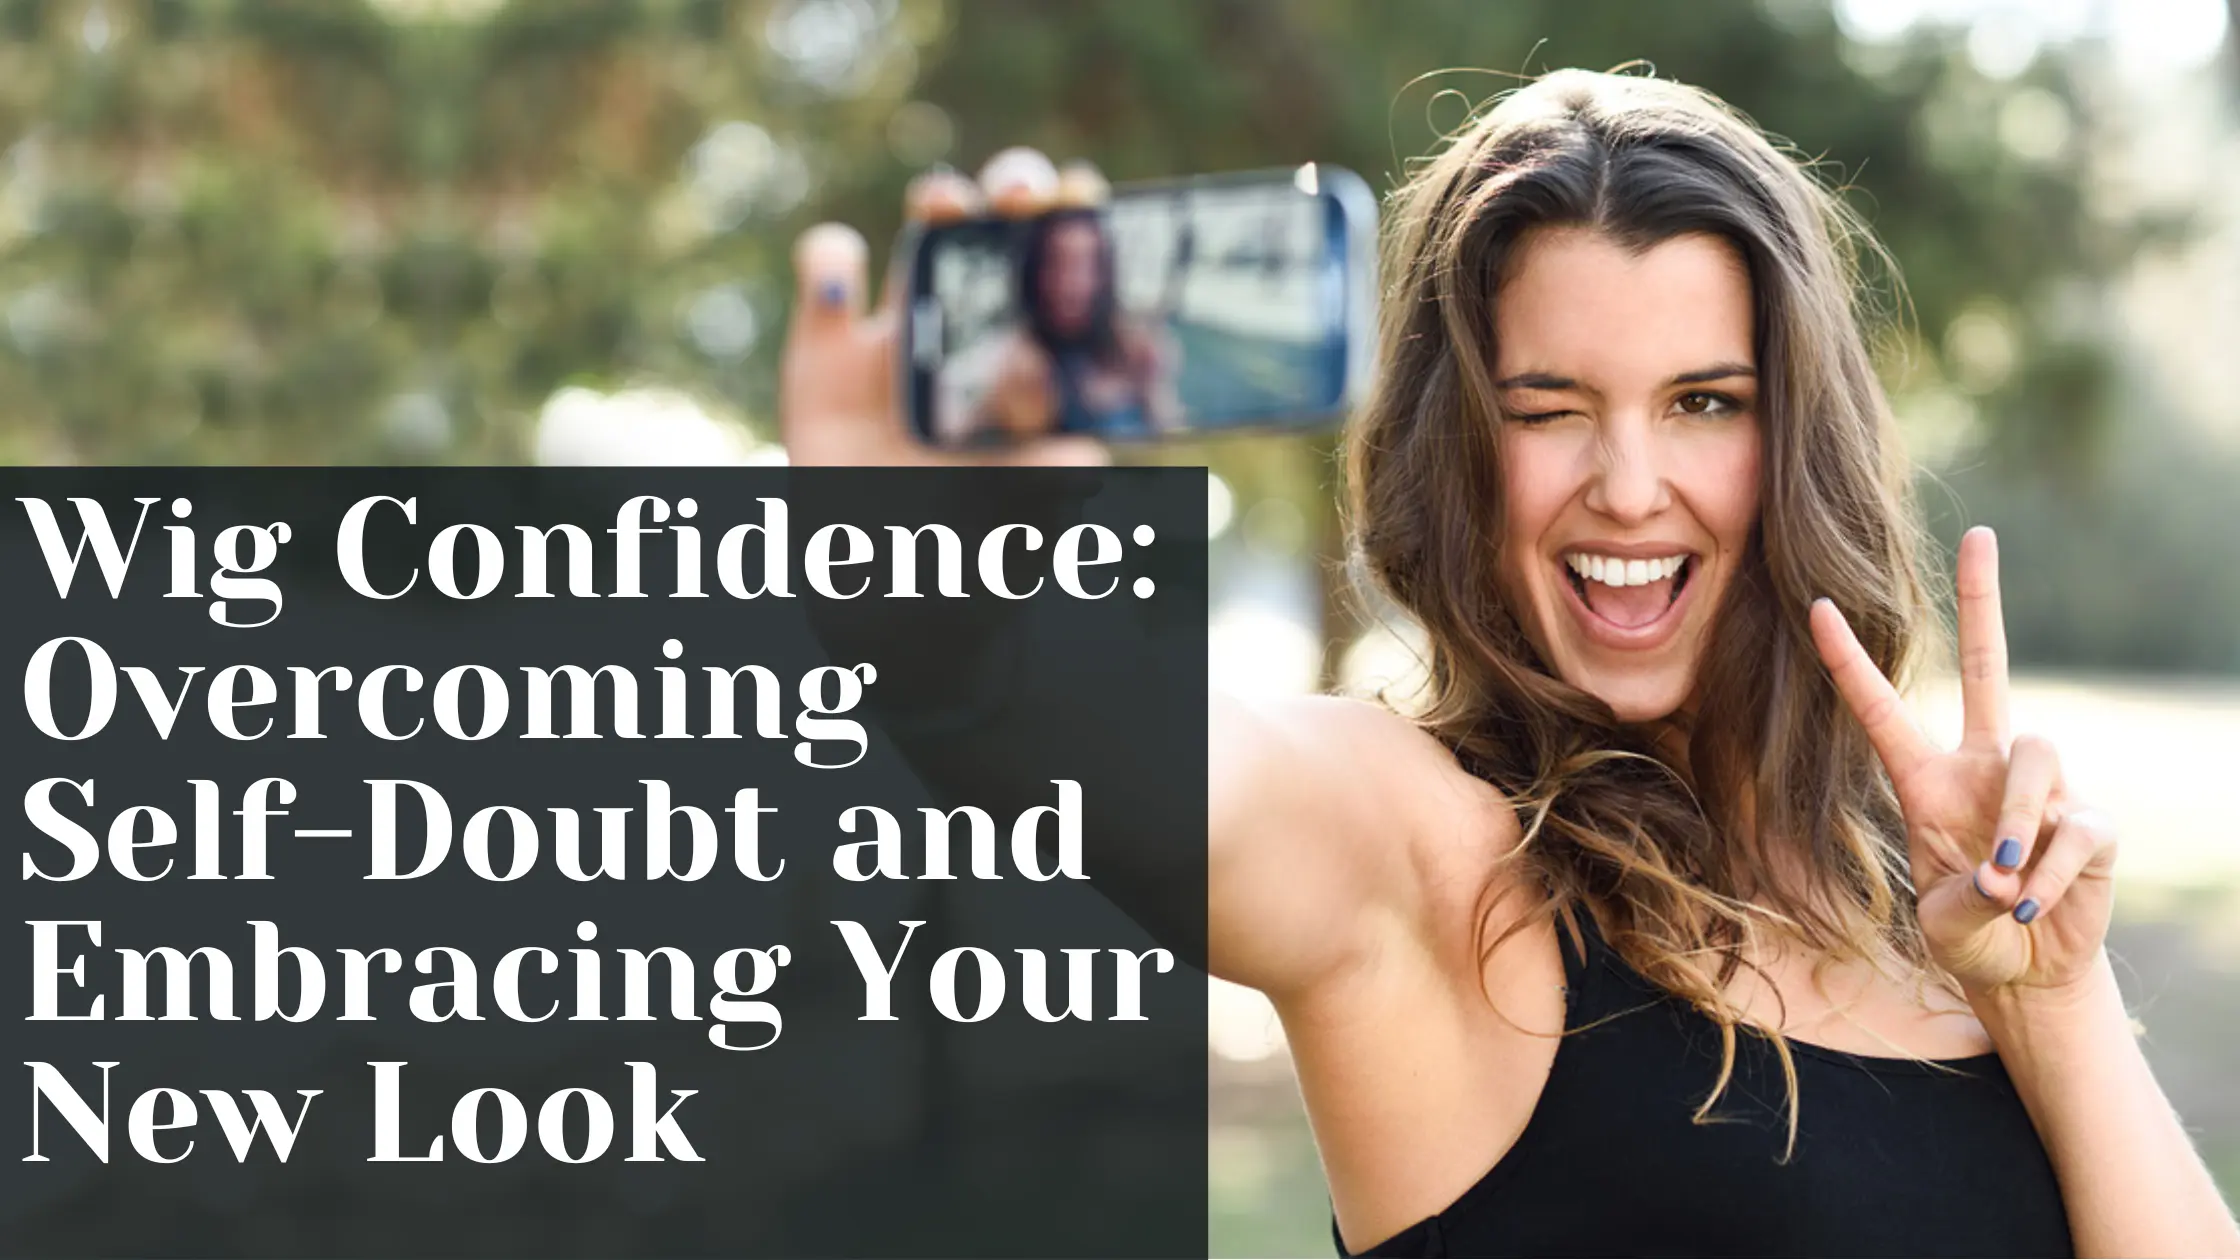 Wig Confidence: Overcoming Self-Doubt and Embracing Your New Look